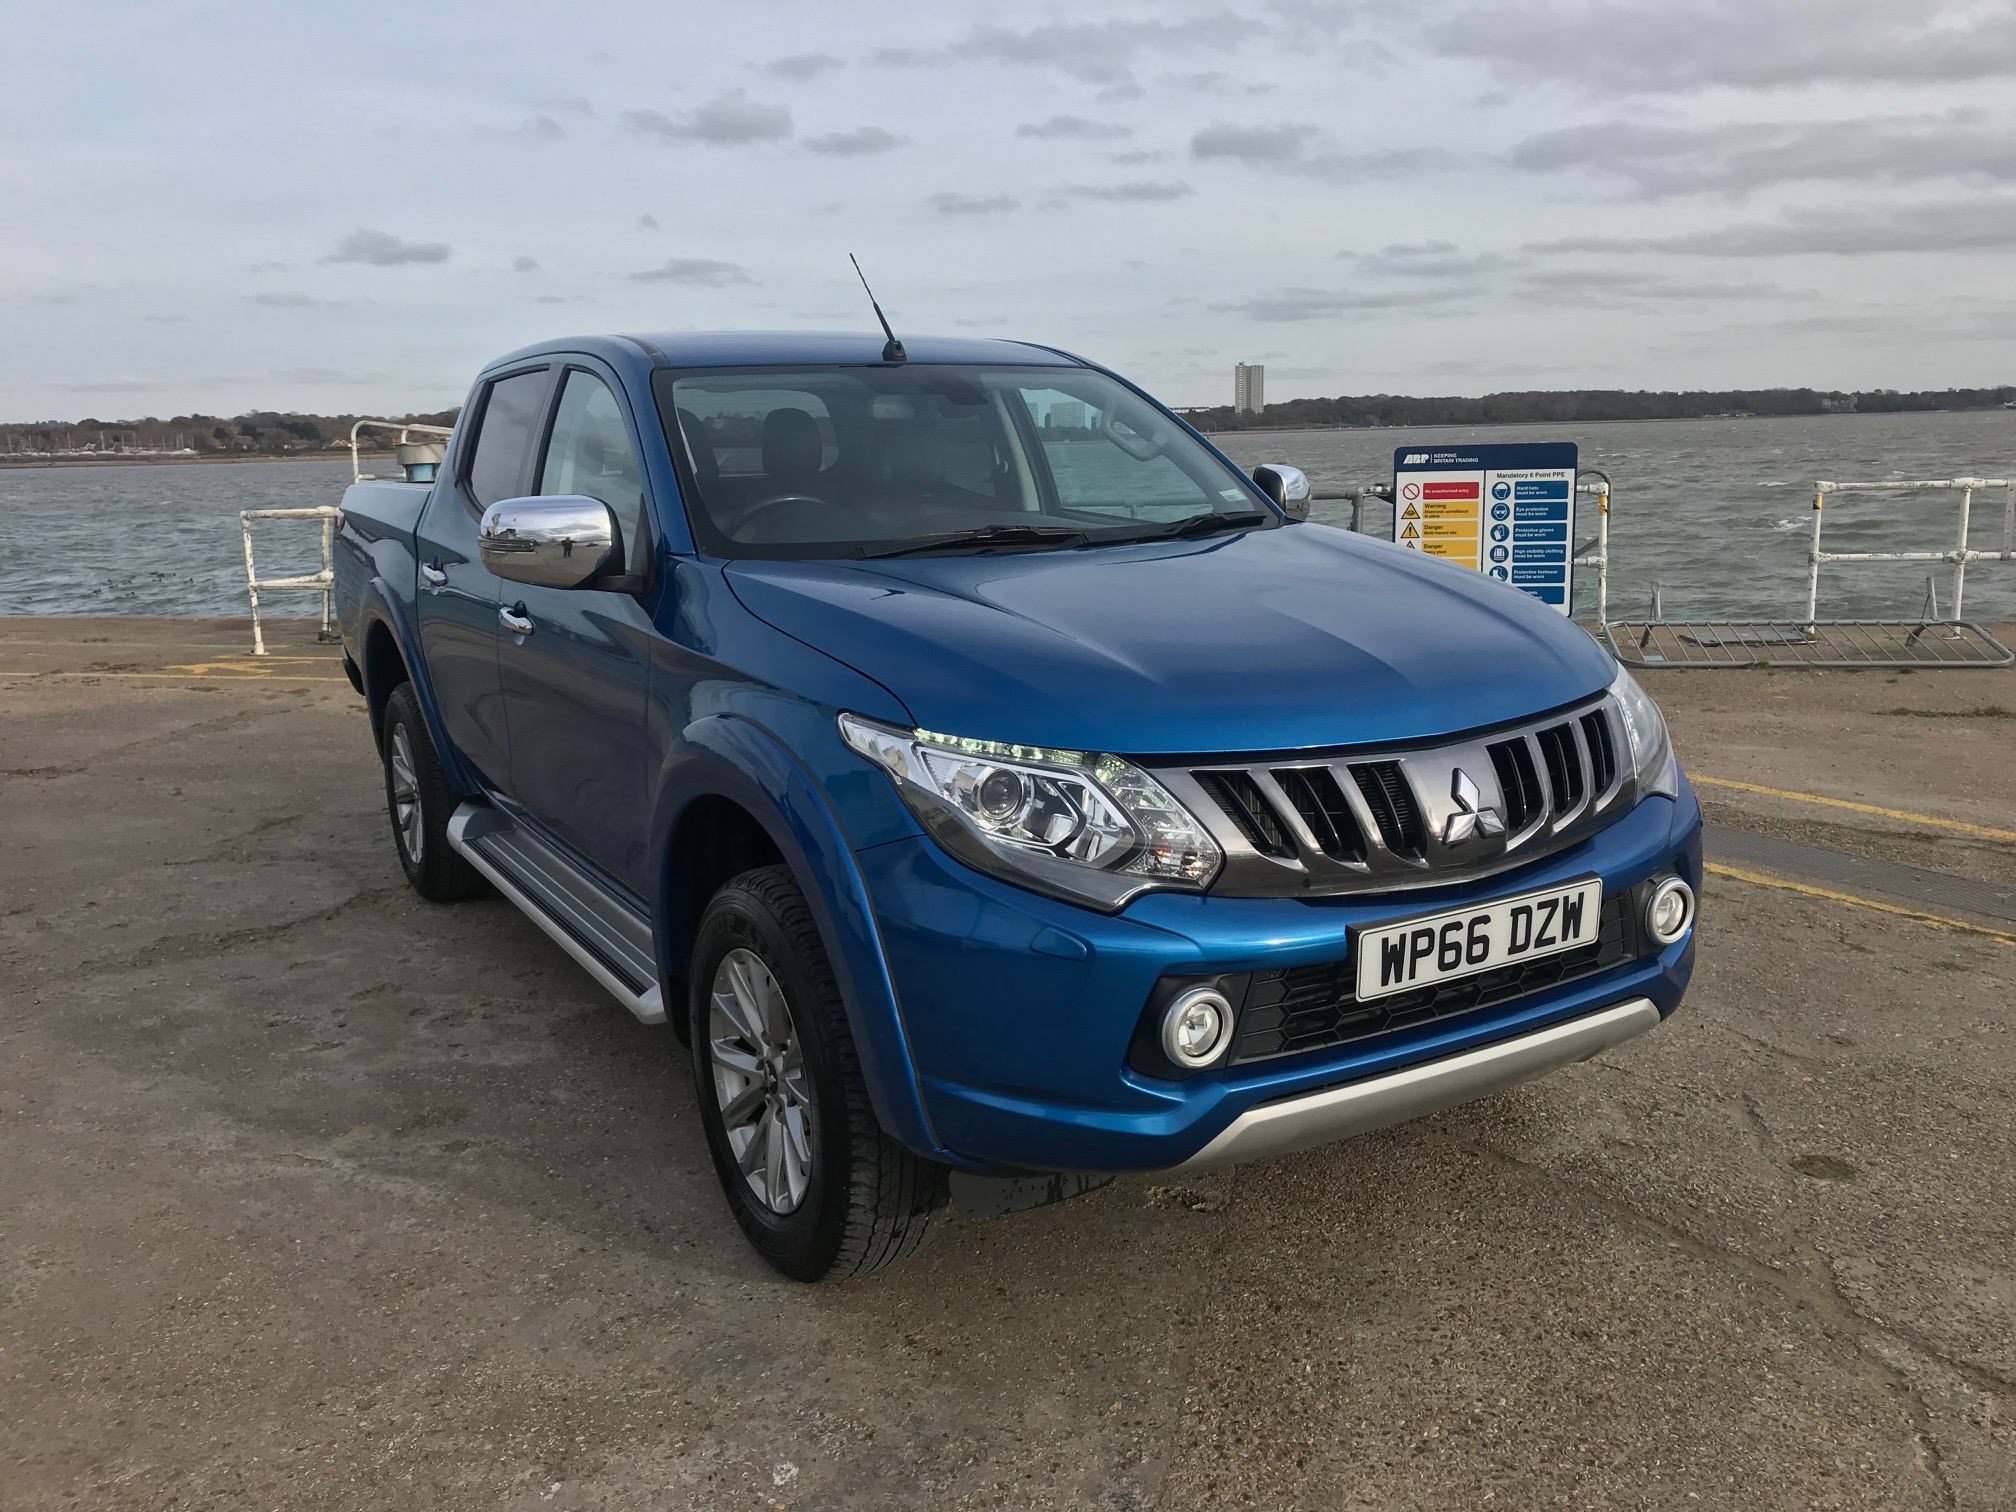 2017 Mitsubishi L200 Double Cab Pick Up Warrior Automatic 4x4 - SOLD